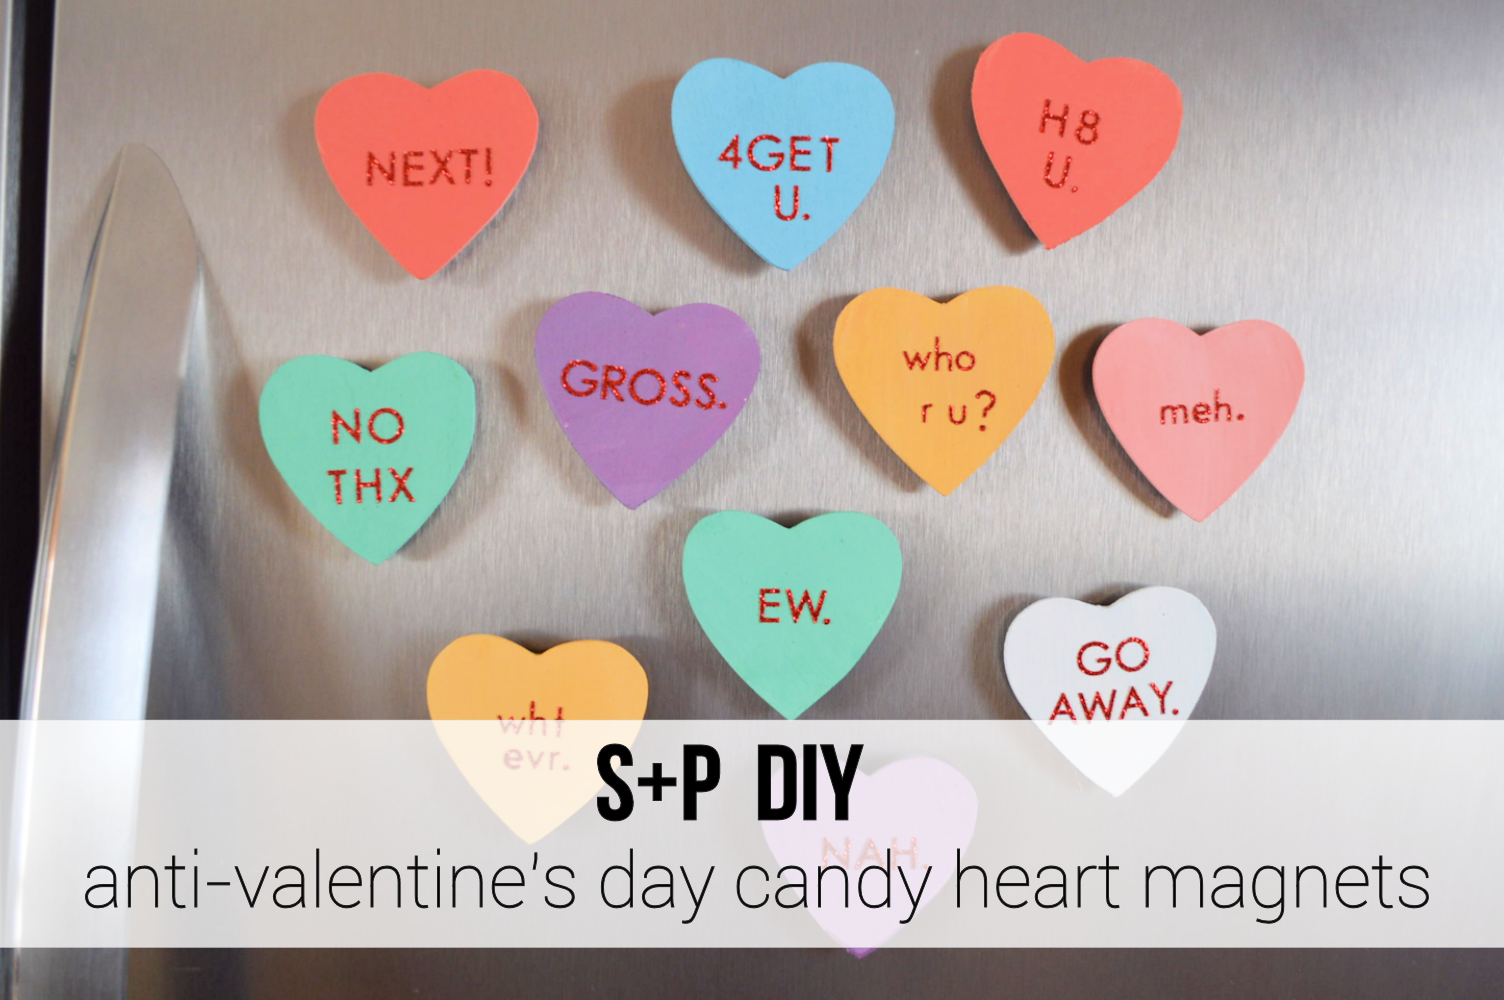 studs and pearls: diy: Anti-Valentine's Day Candy Heart Magnets